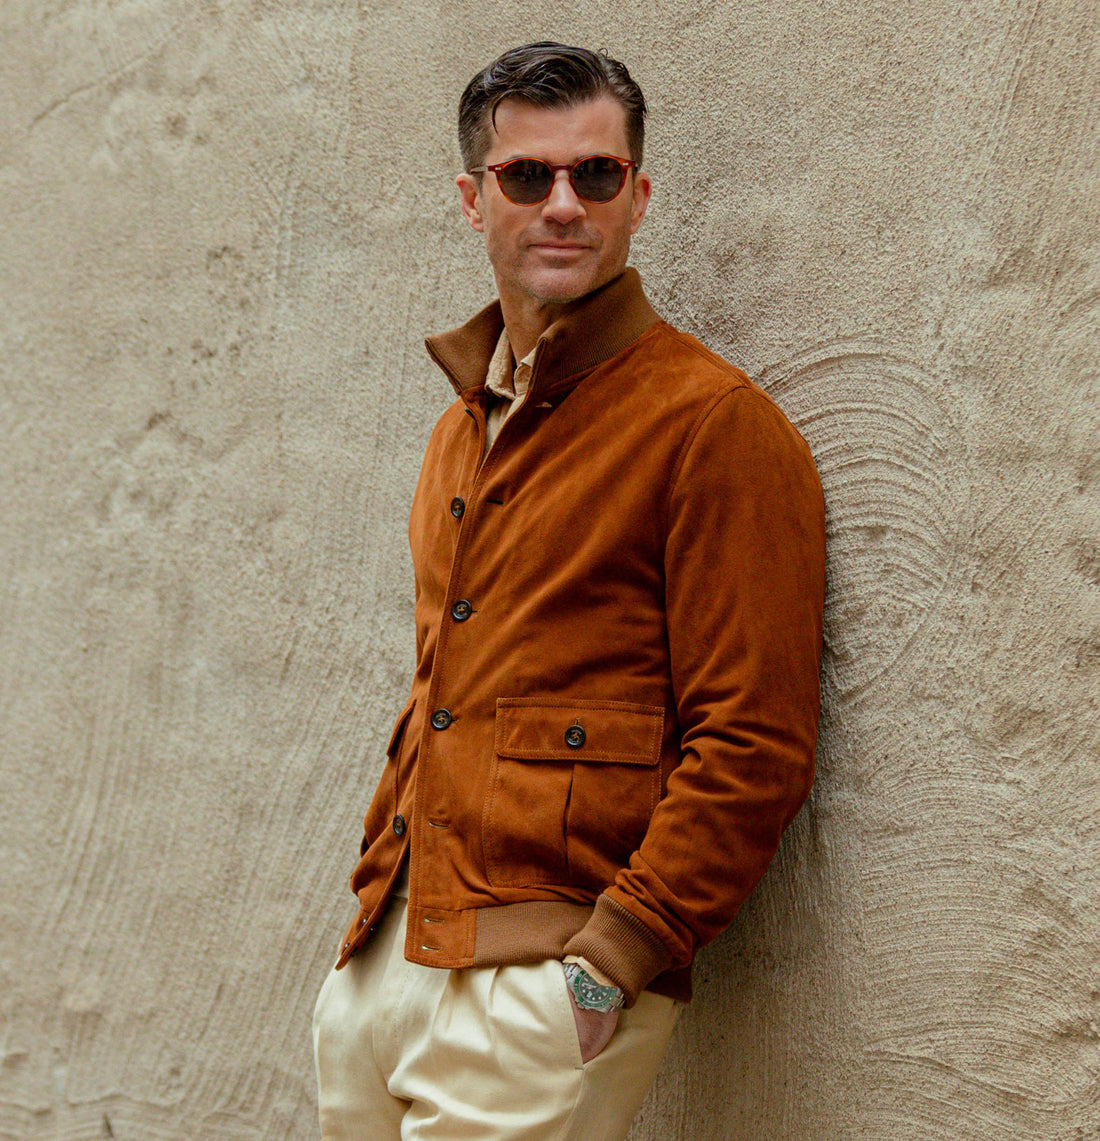 A stylish man in sunglasses, a brown suede jacket, and cream trousers leans against a textured wall.